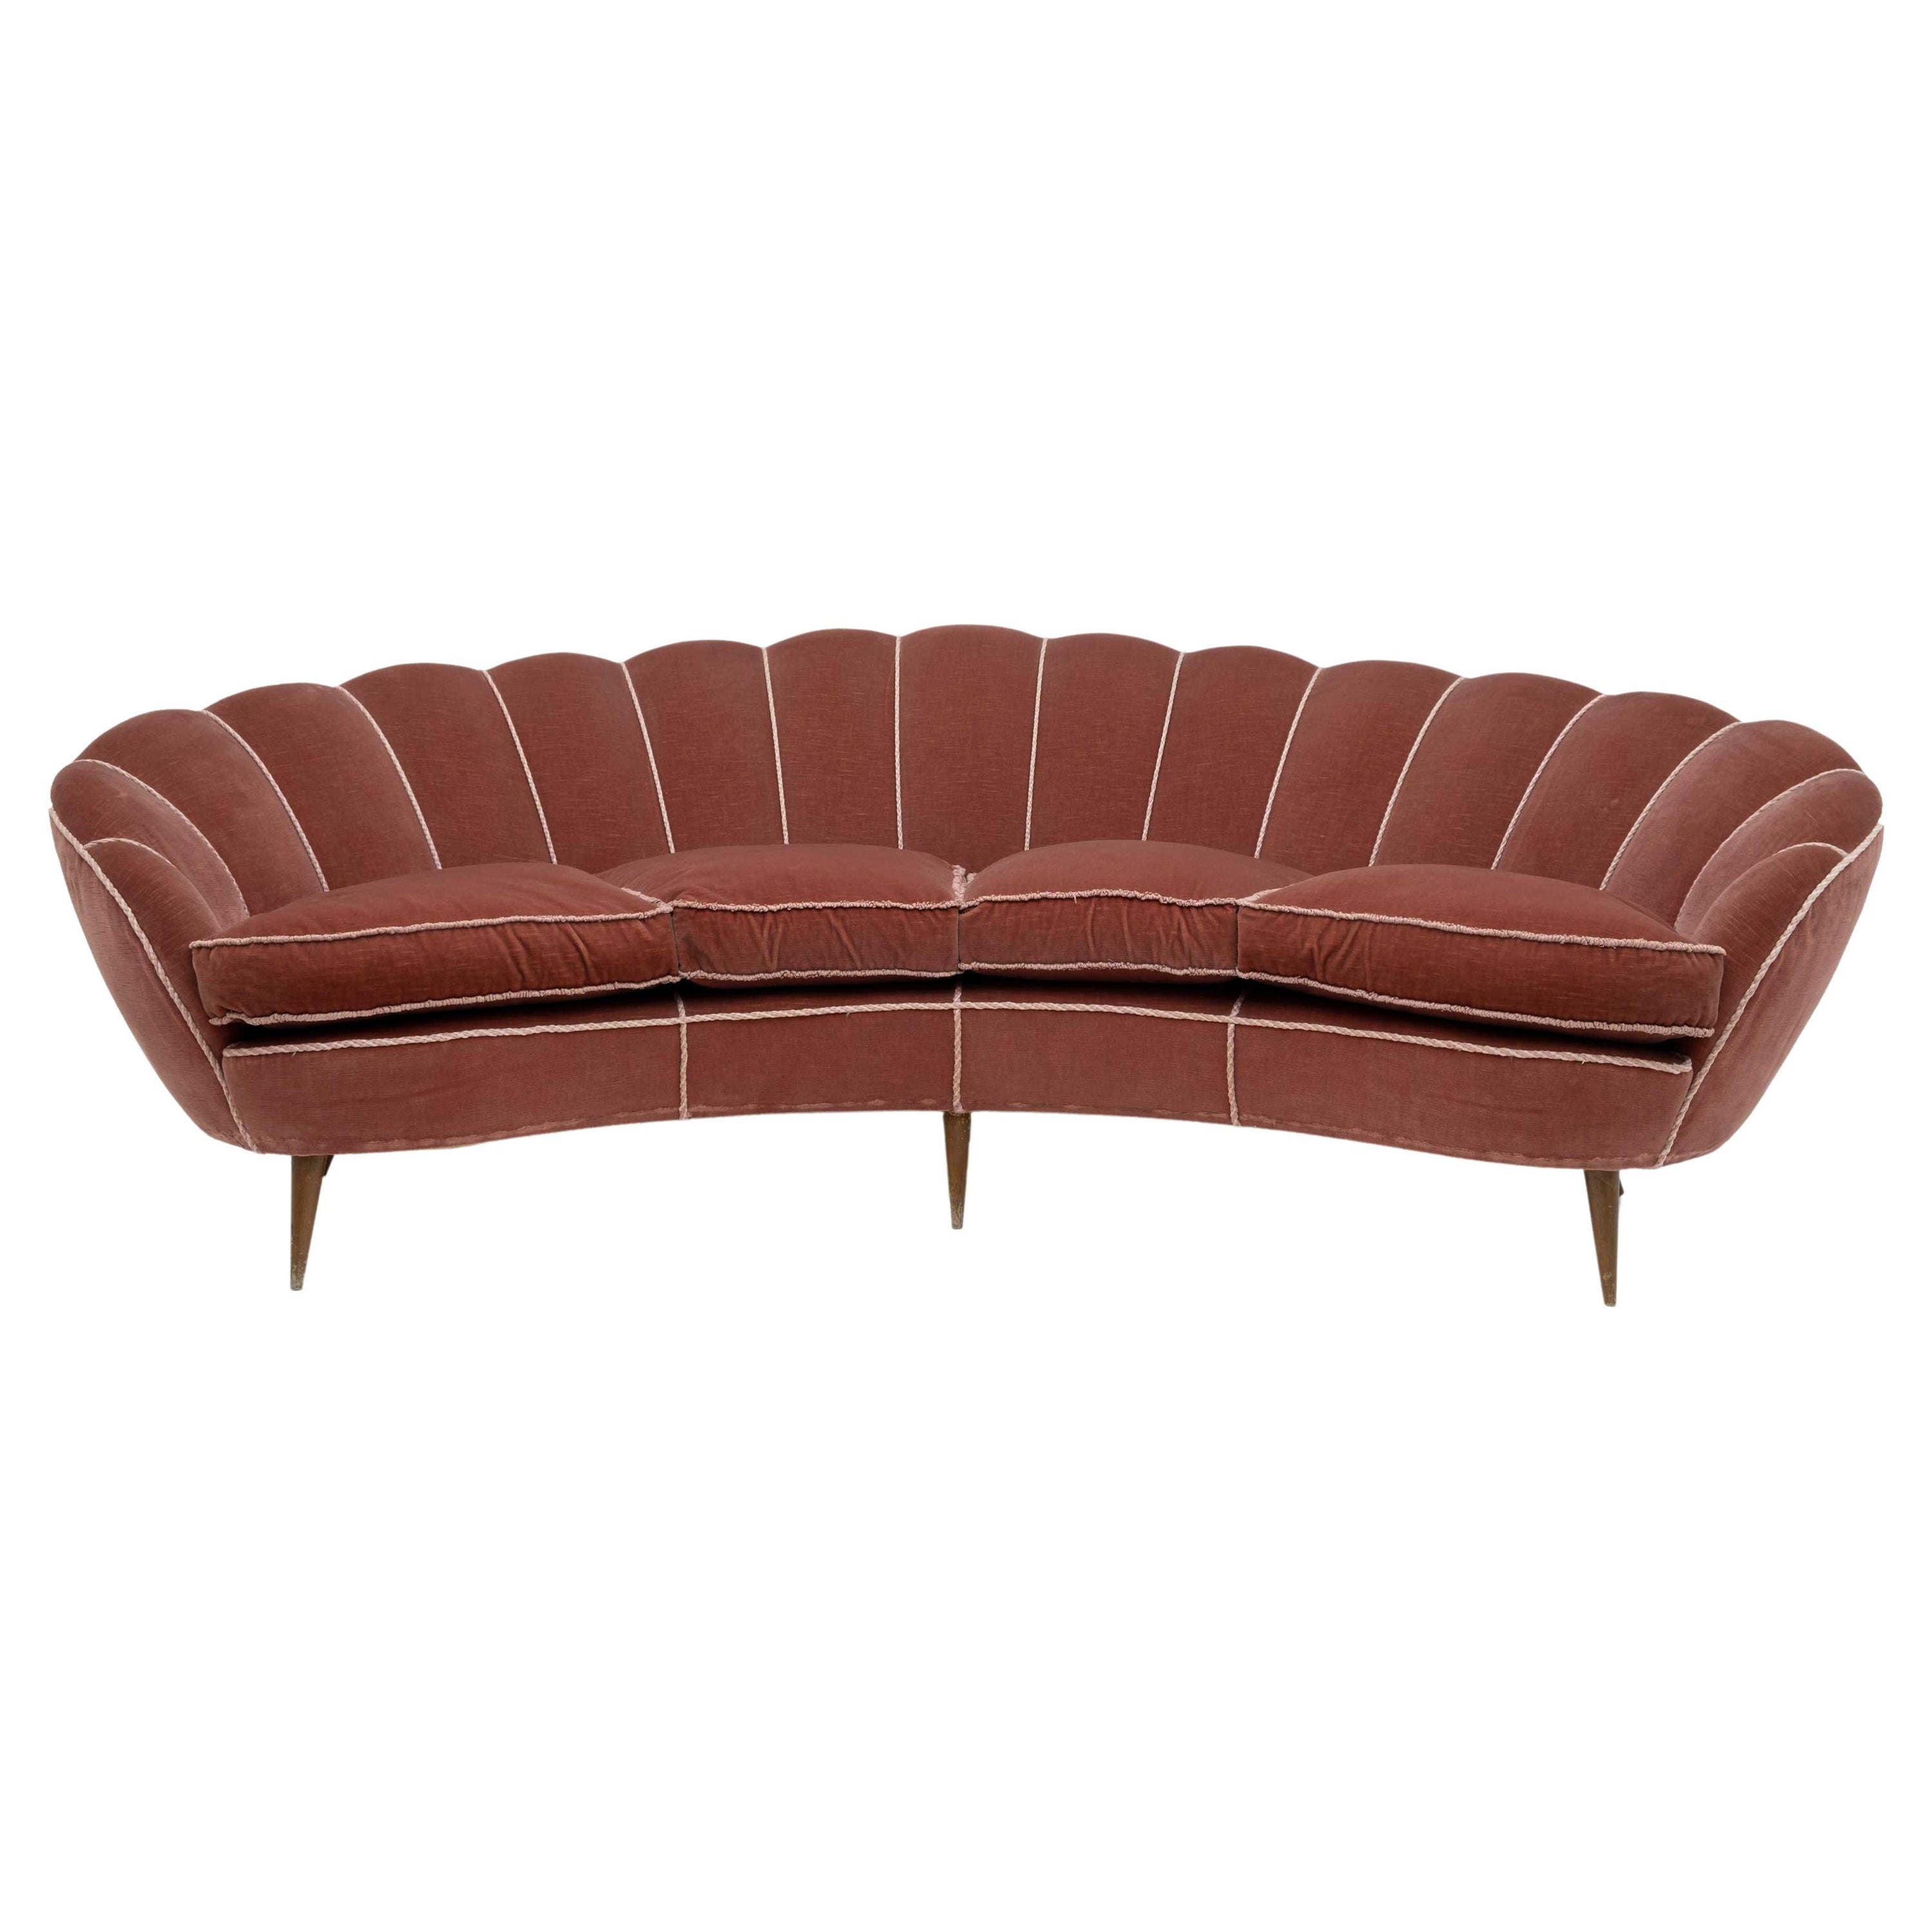 Attributed Gio Ponti Mid-Century Modern Italian Curved Sofa by ISA Bergamo, 50s For Sale